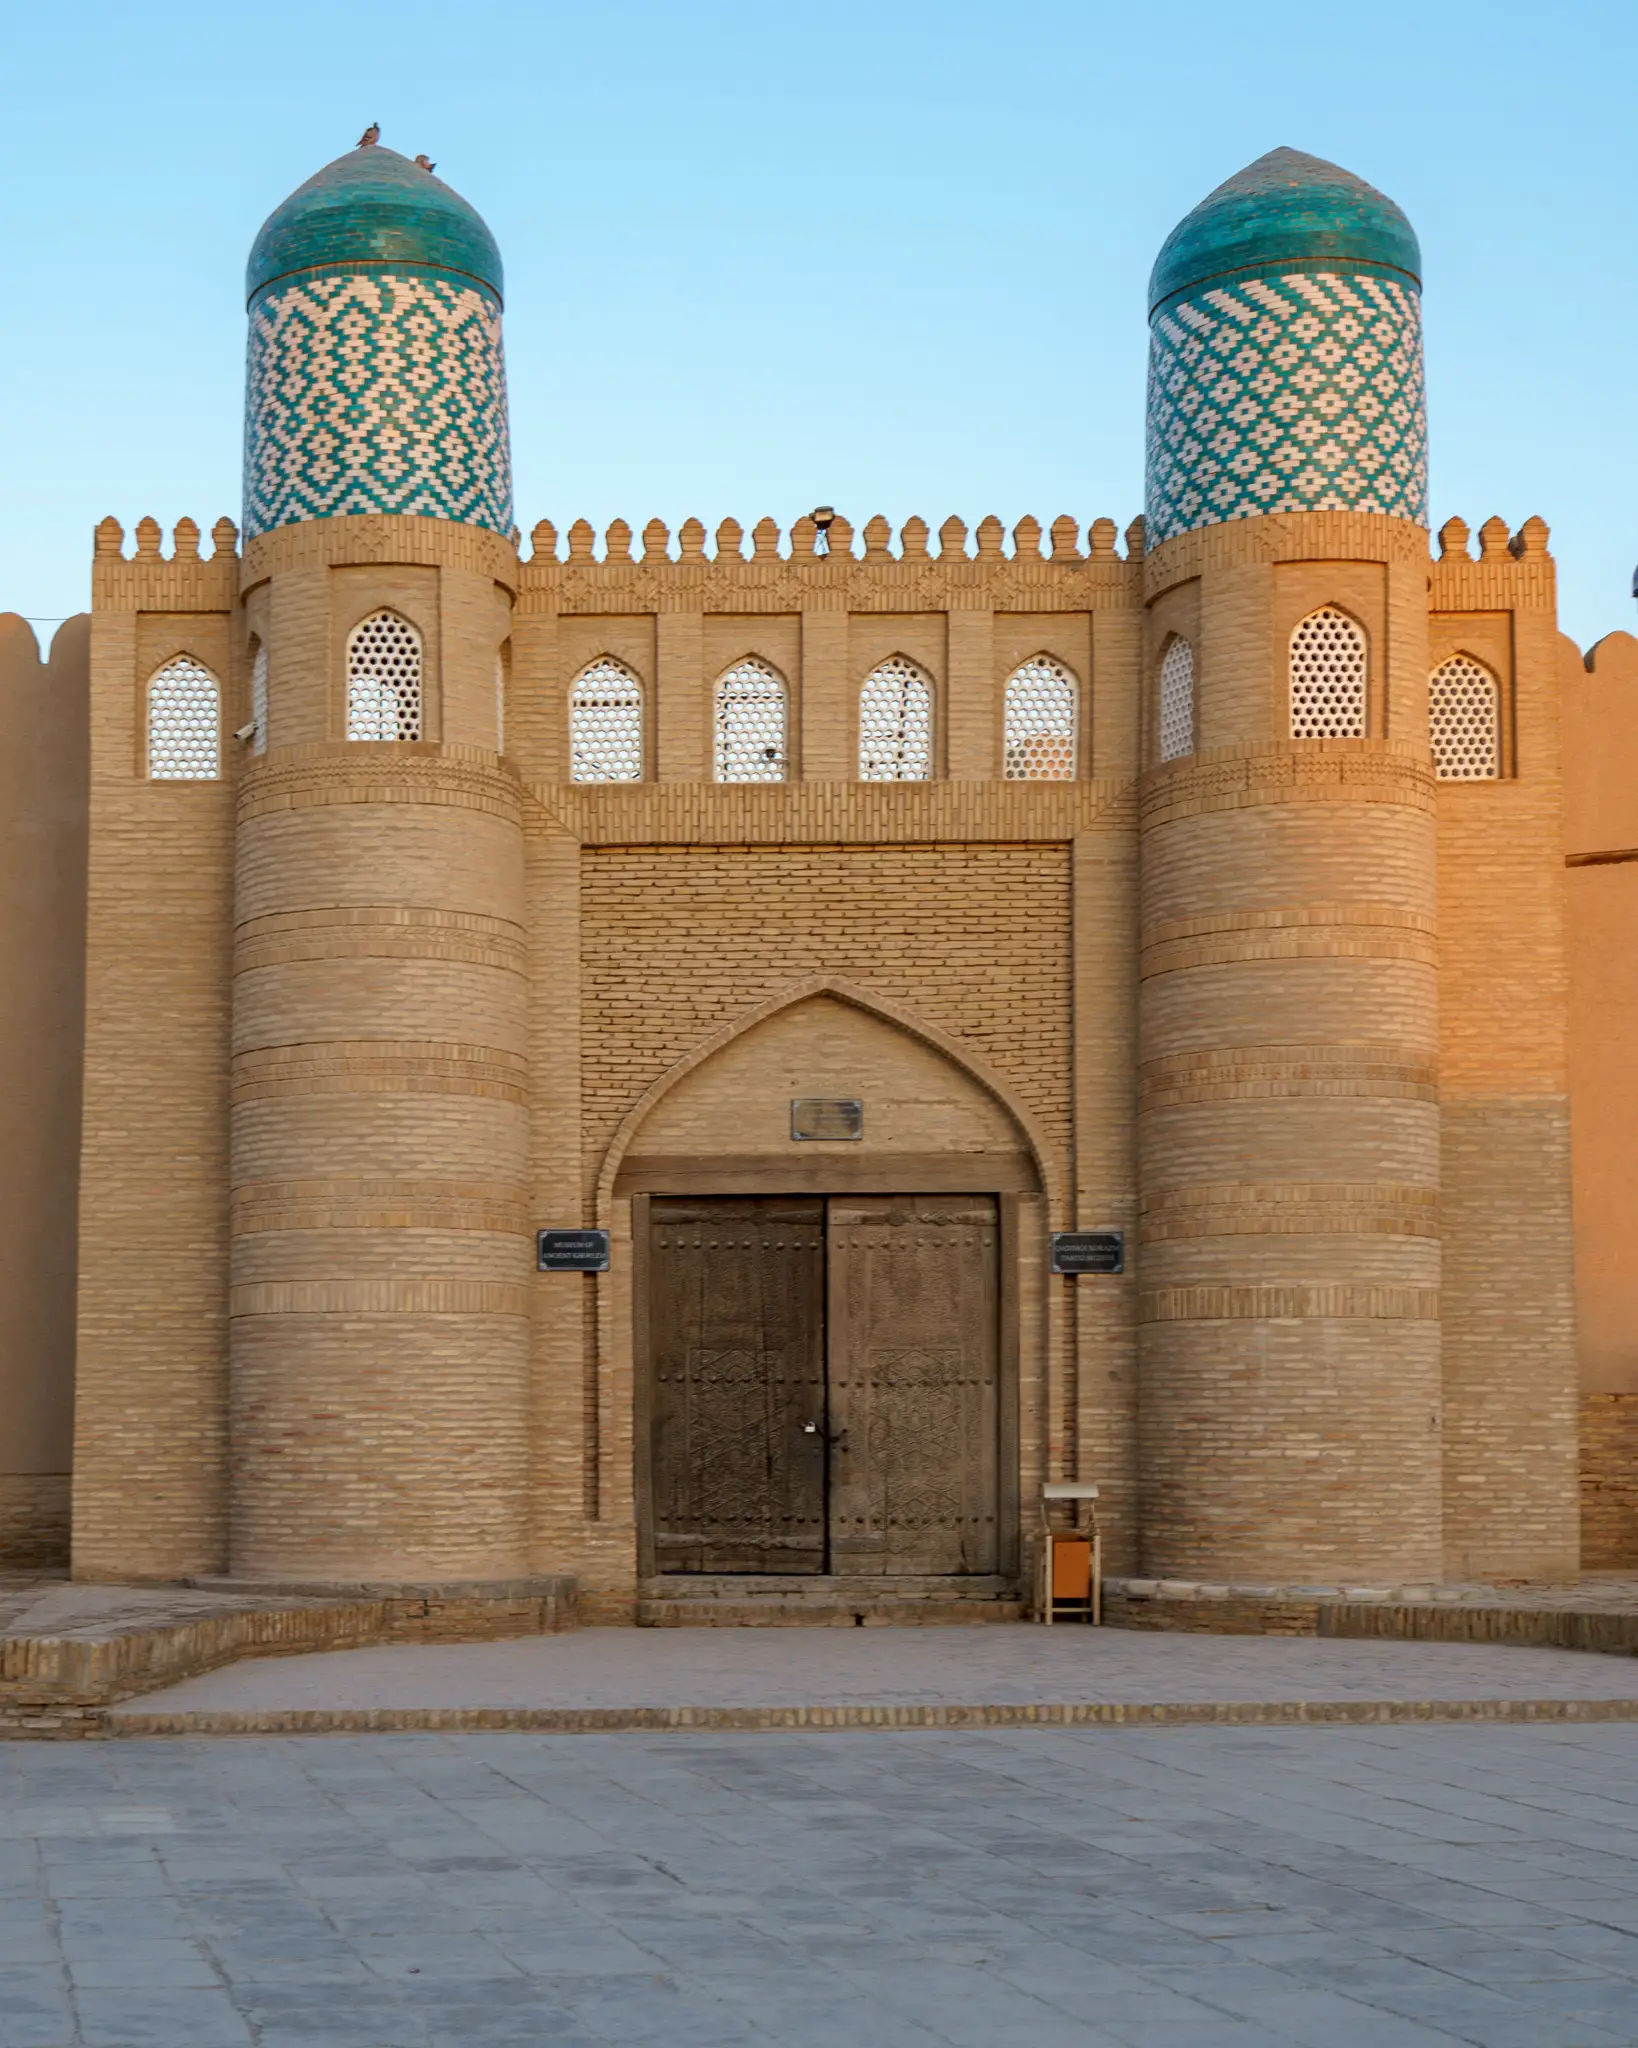 Khiva's Old Town is full of beautiful architecture 